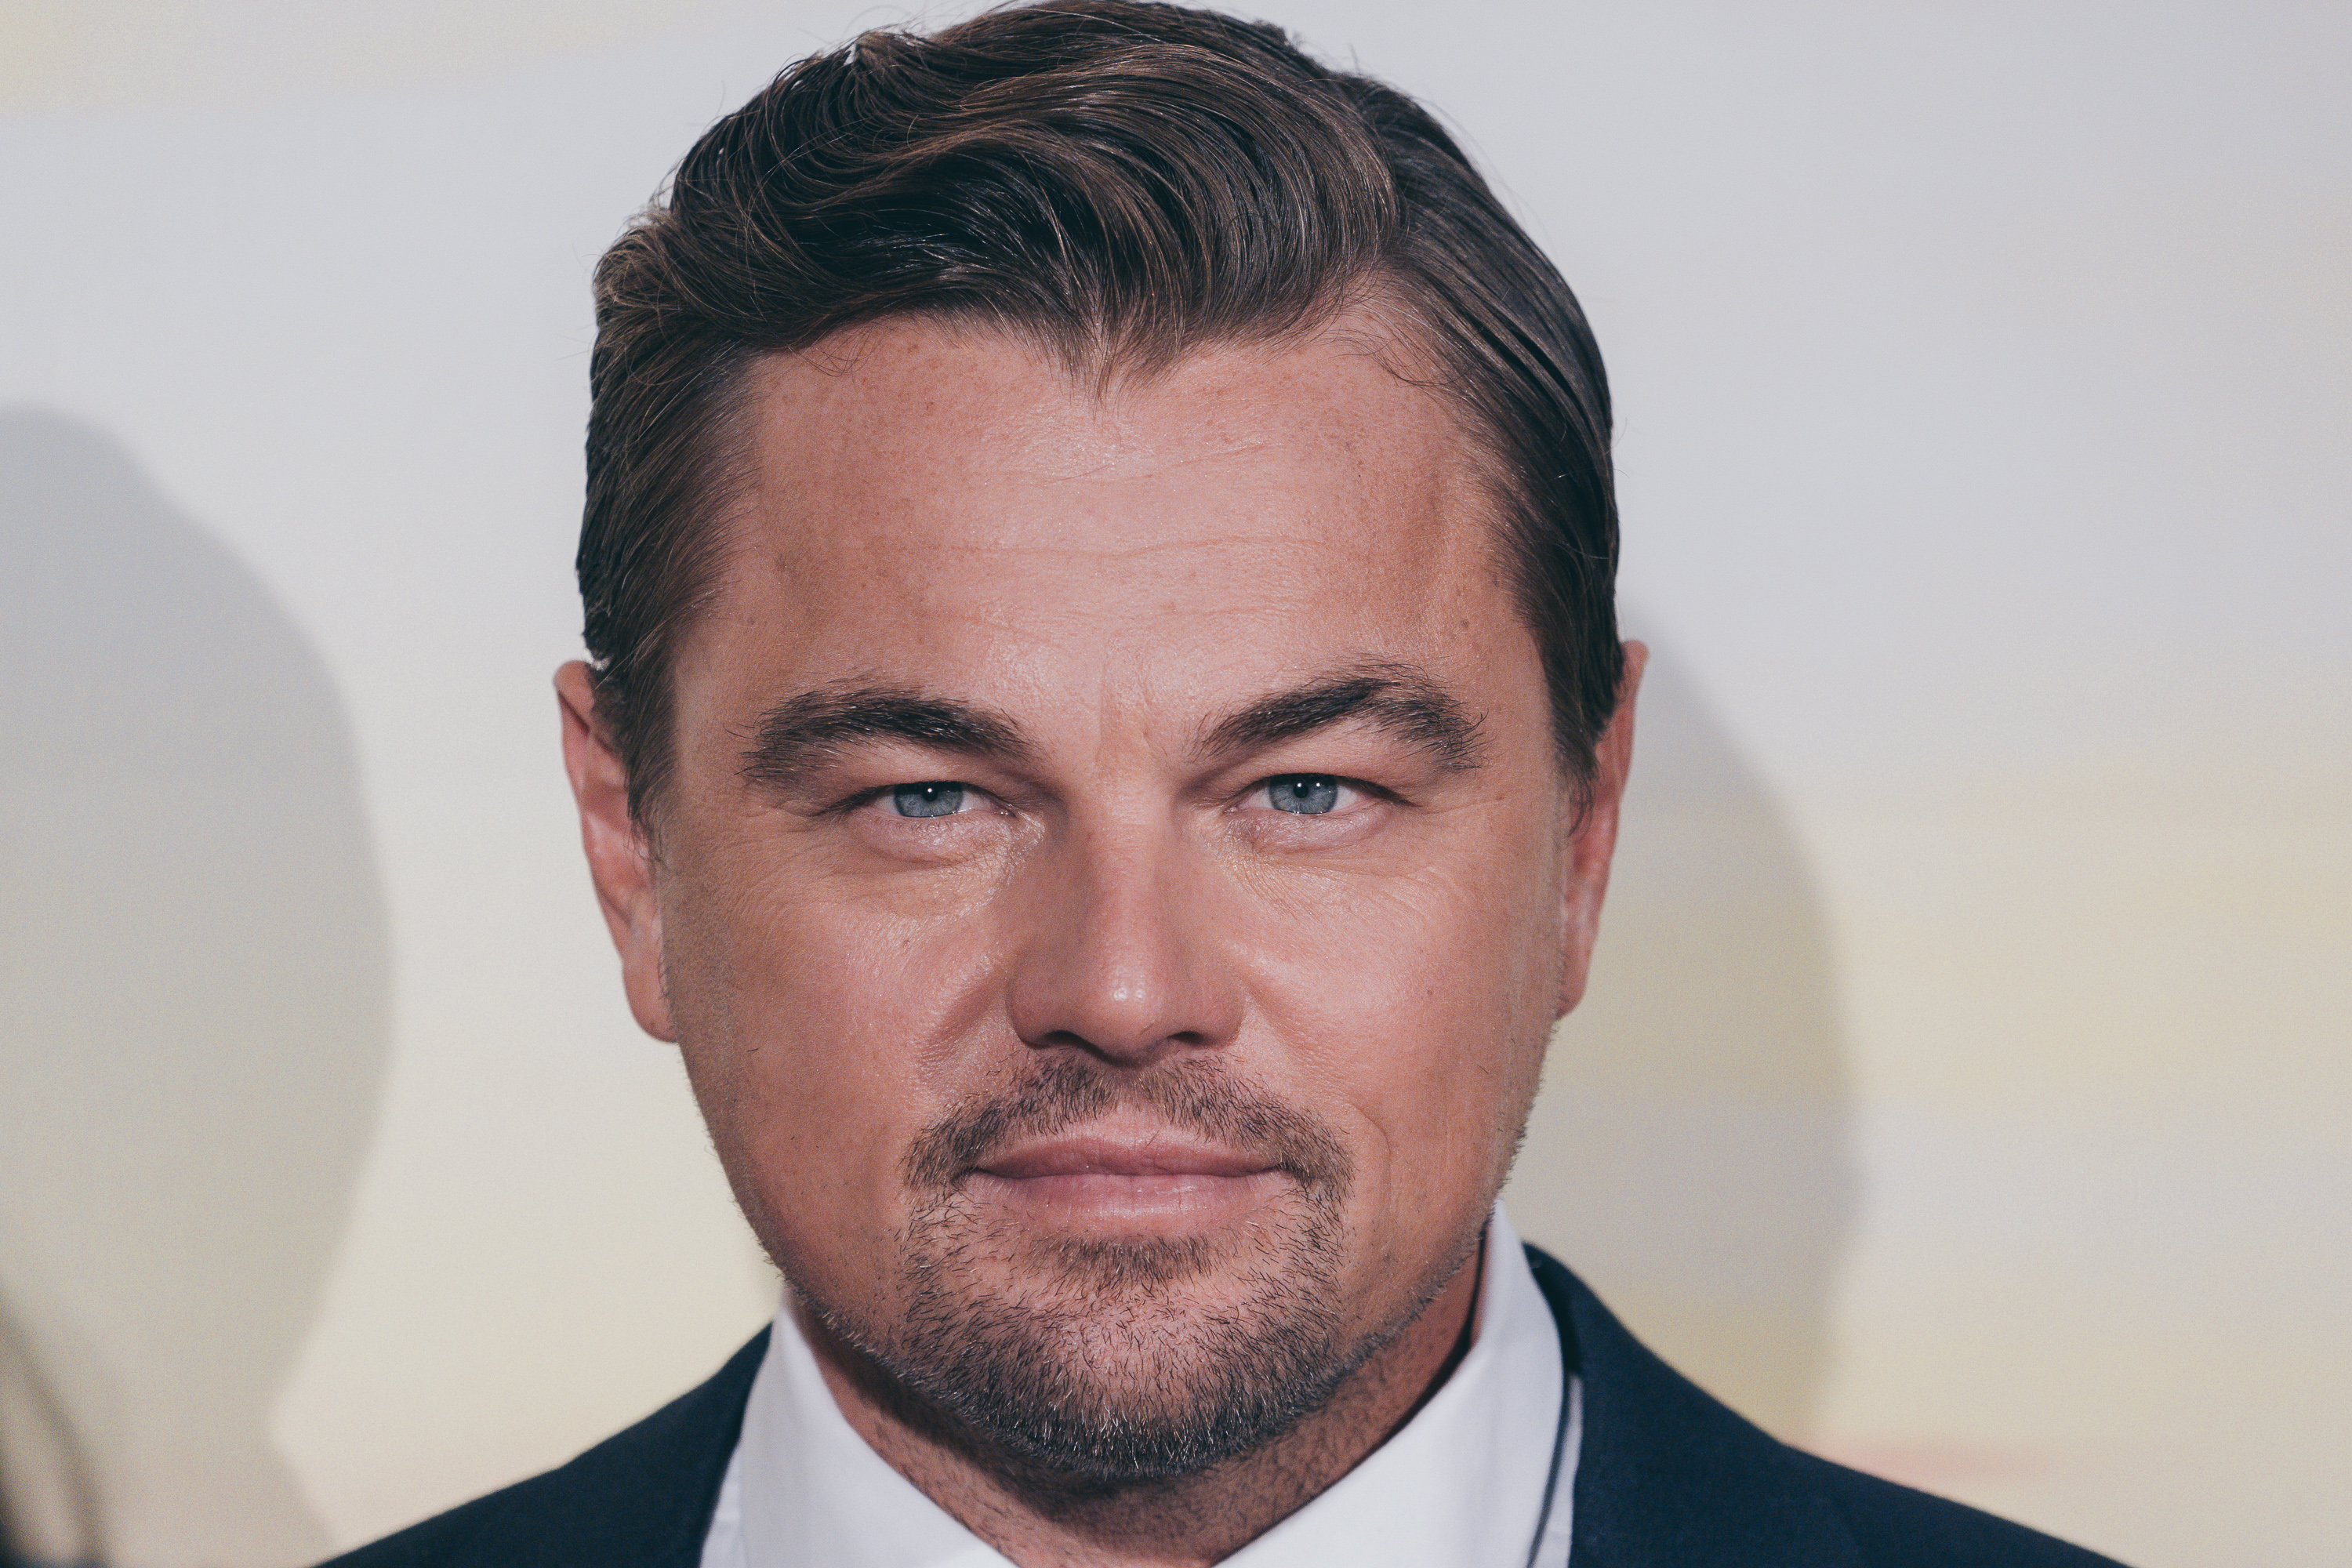 Leonardo DiCaprio attends the "Once Upon a Time in Hollywood" premiere on August 2, 2019 in Rome, Italy | Source: Getty Images